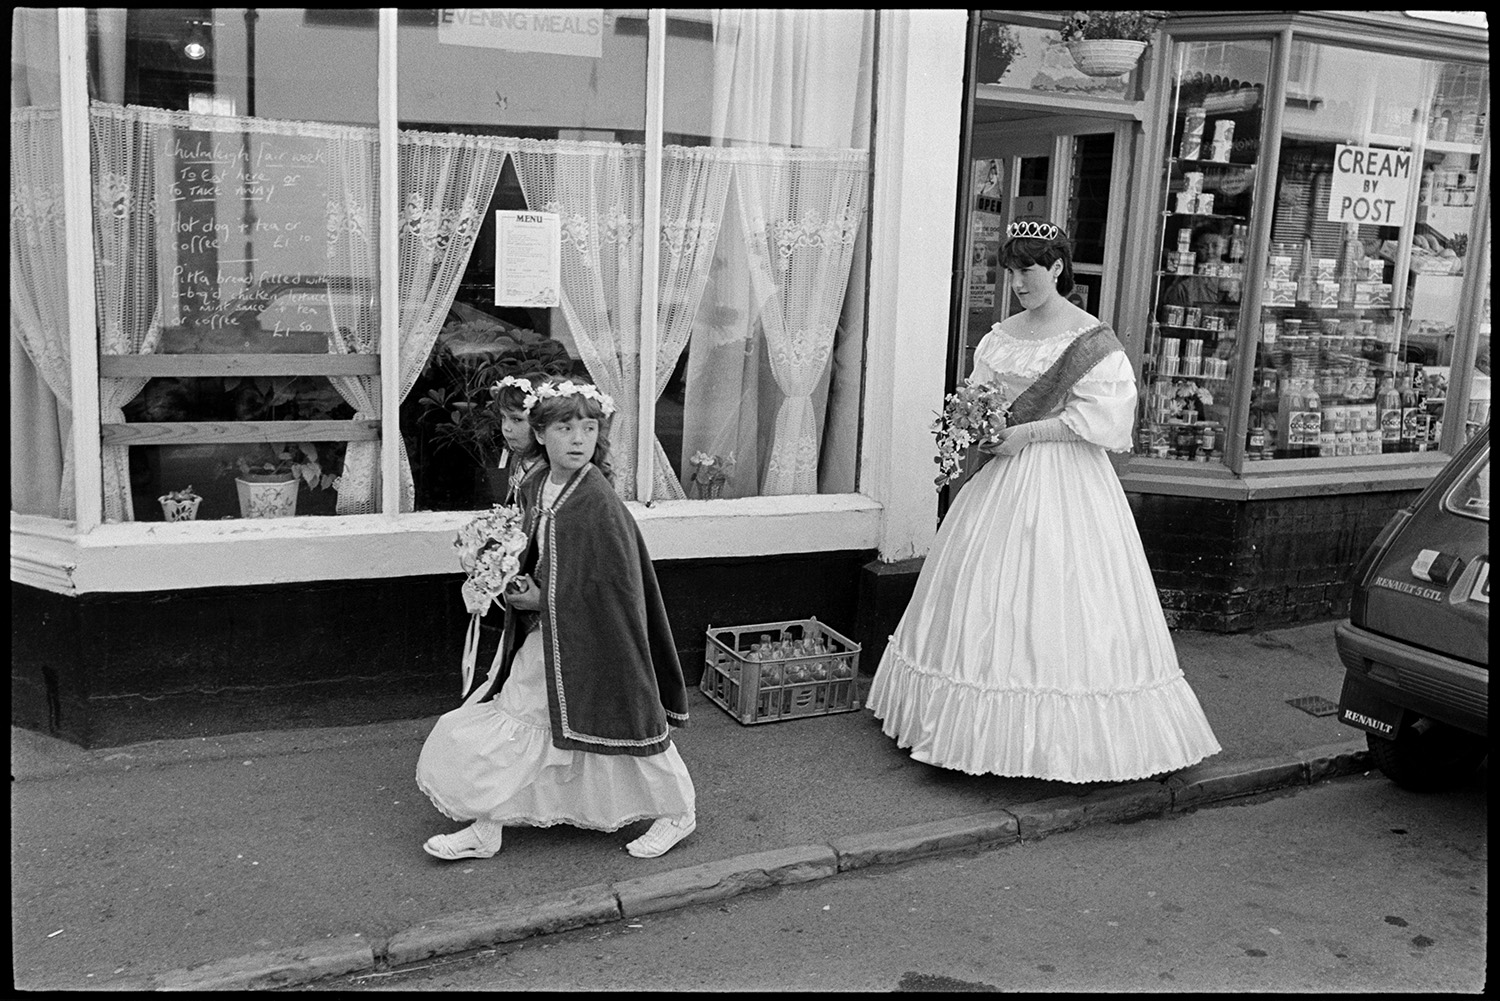 Fair Queen and attendants in street outside newsagents shop and in town hall. White dress. 
[Emma Bending, the Chulmleigh Fair Queen walking along a street with two attendants in Chulmleigh. She is wearing a white dress and a sash. They are passing a shop front displaying canned food and a café window. A crate of empty milk bottles is on the pavement.